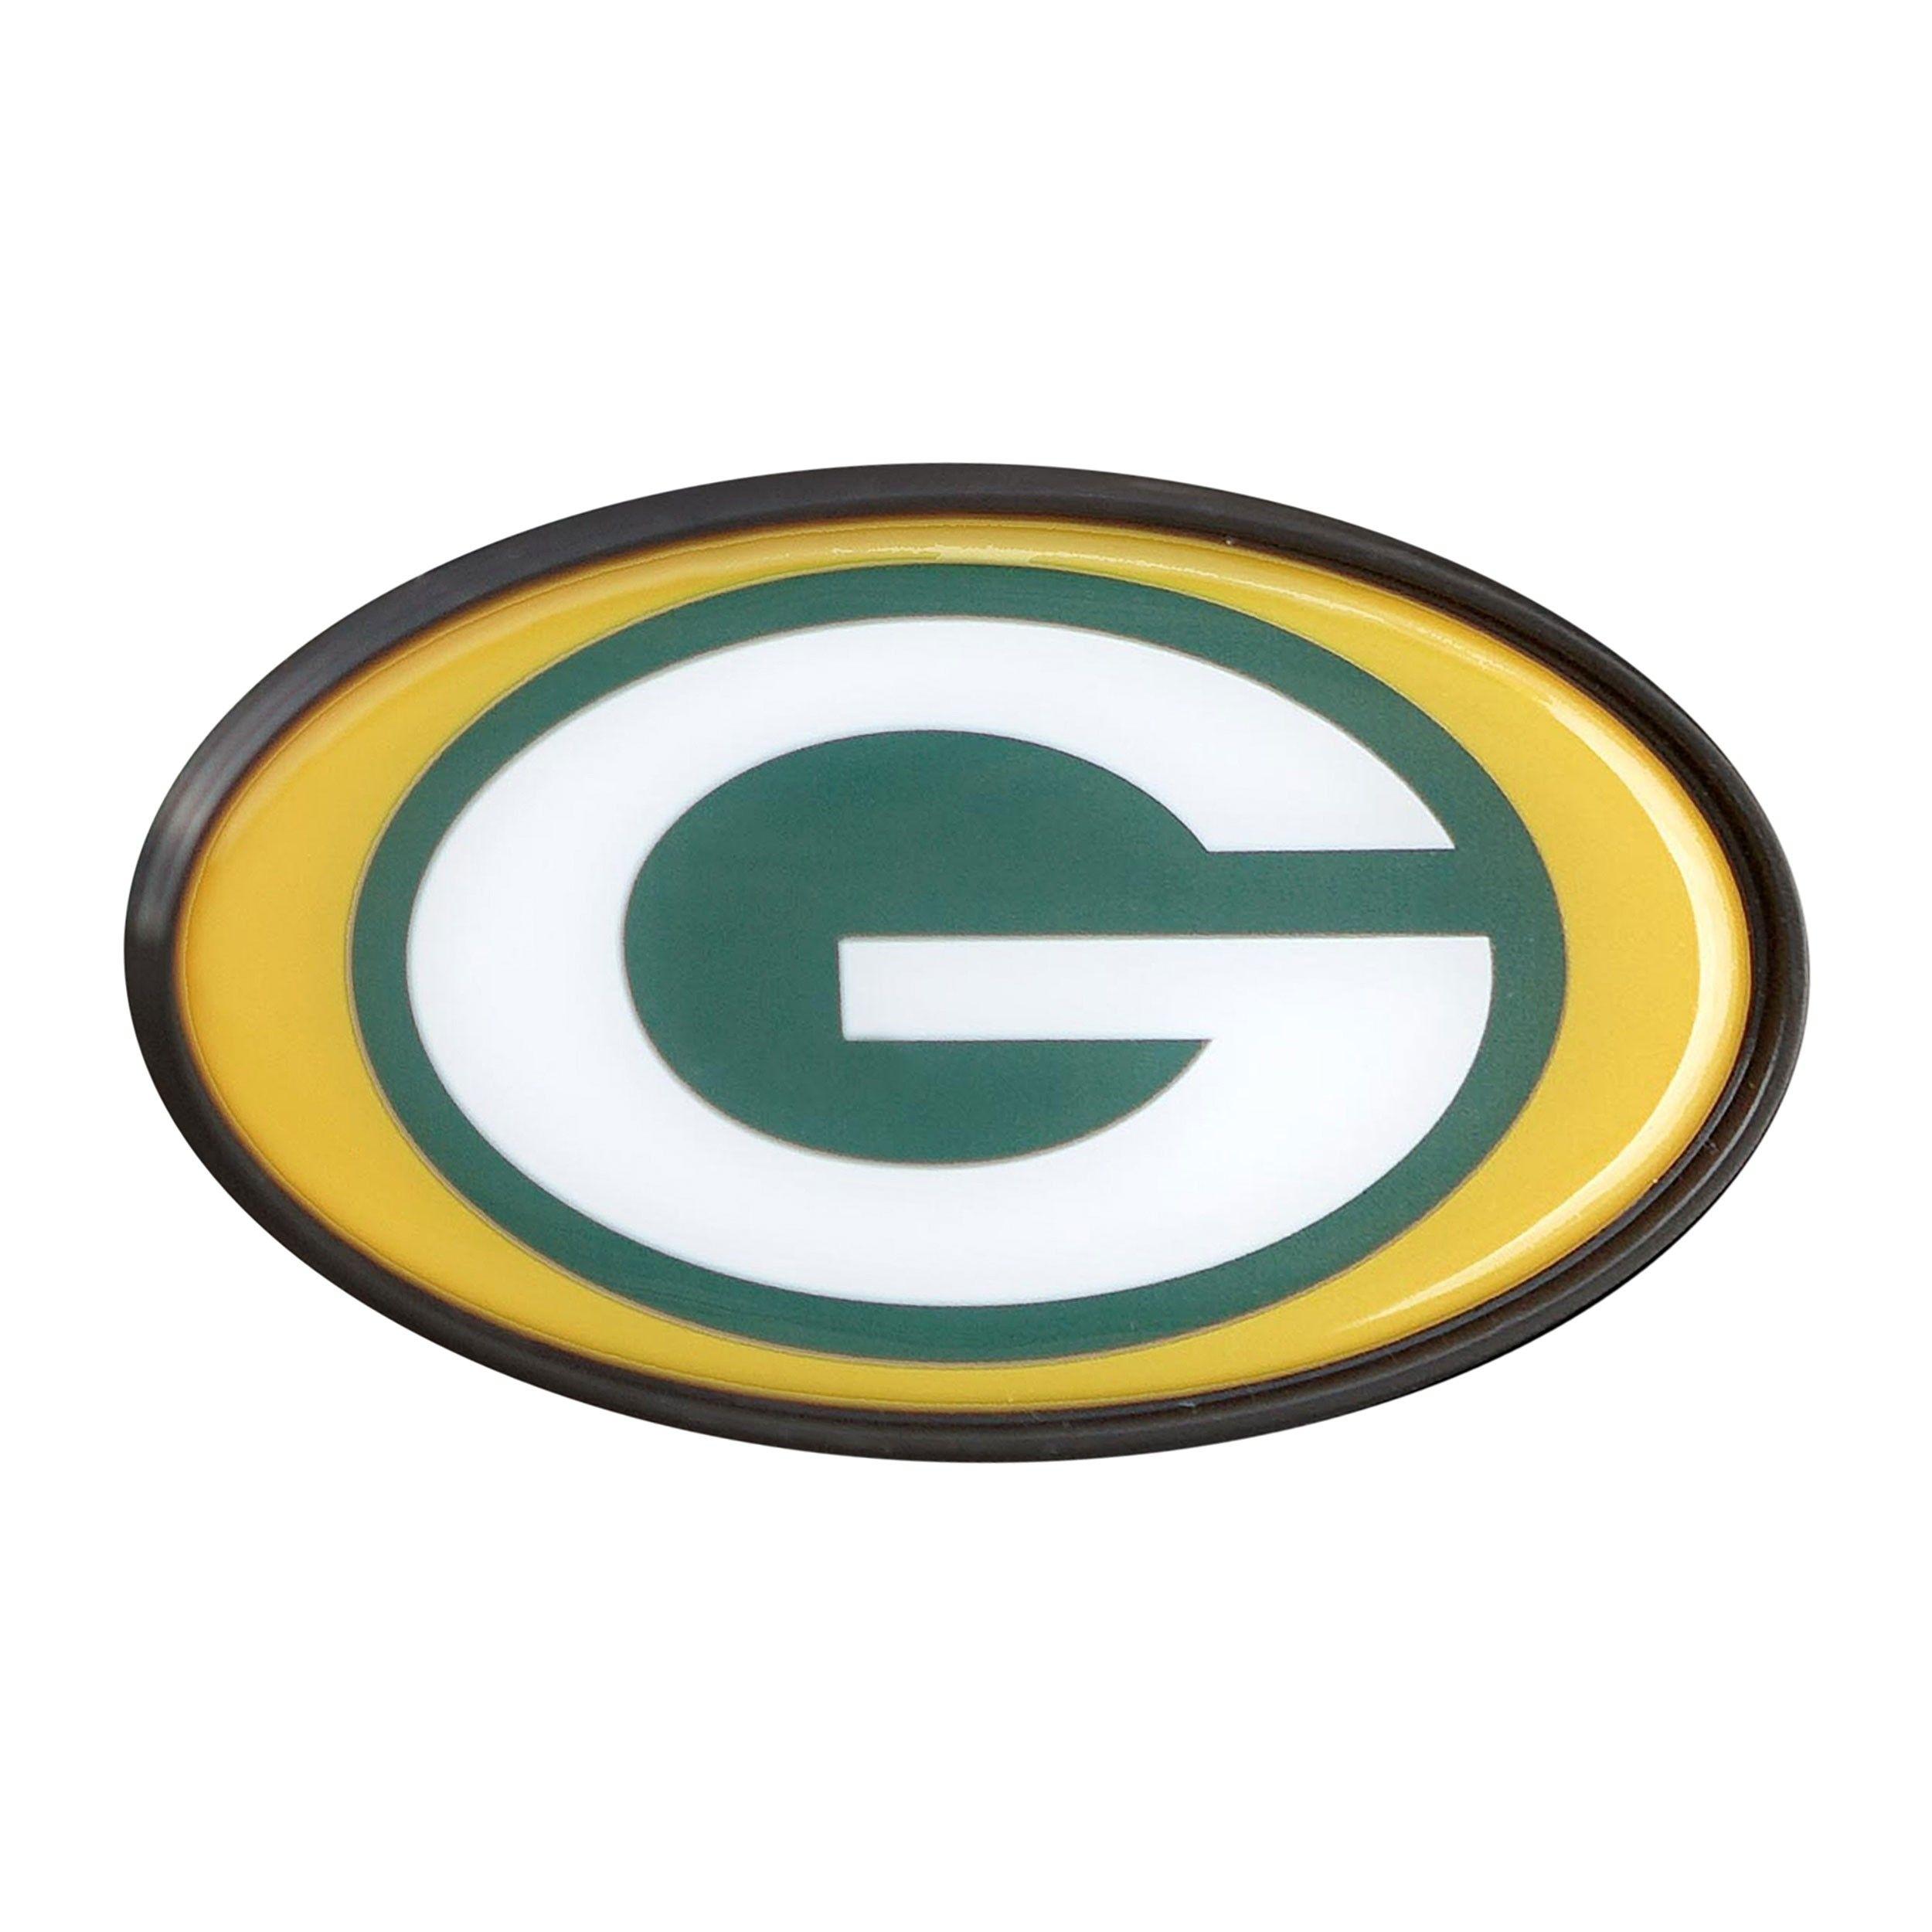 Green Bay Packers Logo - Green Bay Packers 'G' Logo Trailer Hitch Cover